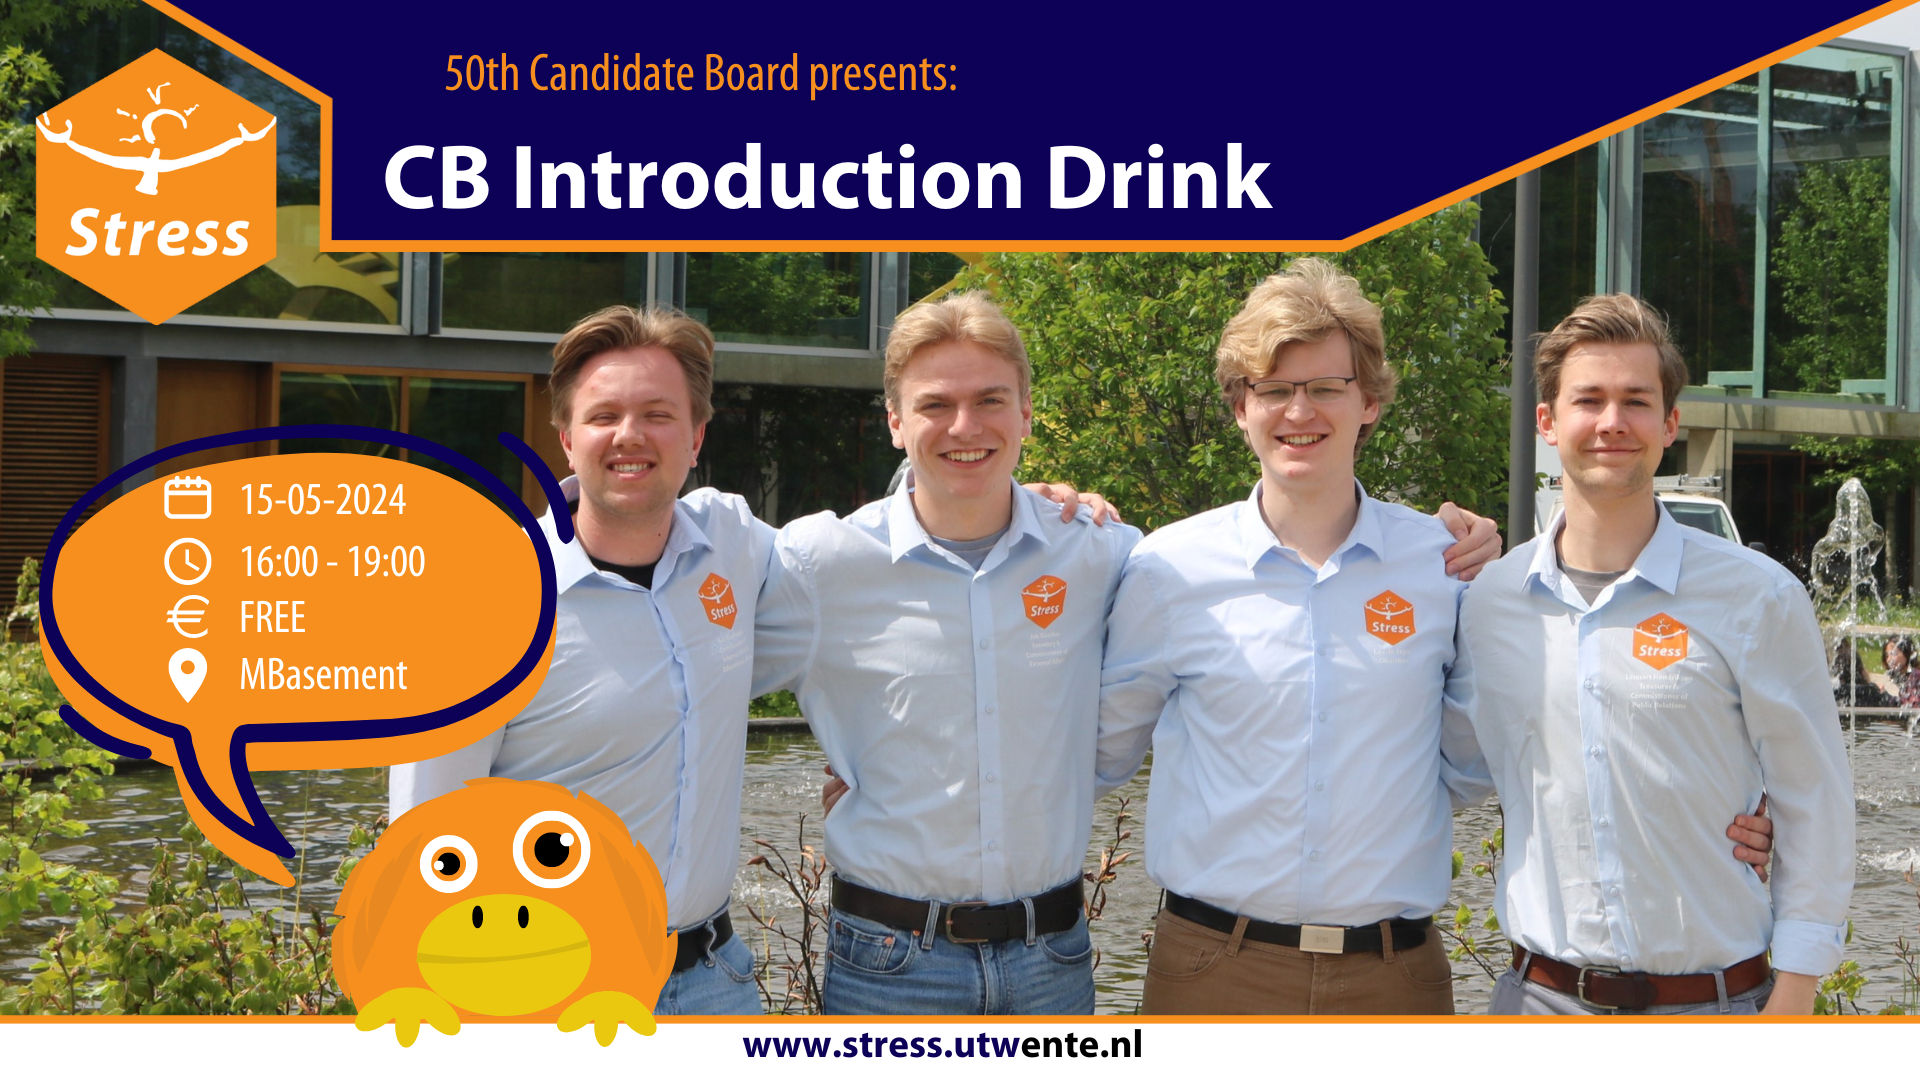 Candidate Board Introduction Drink